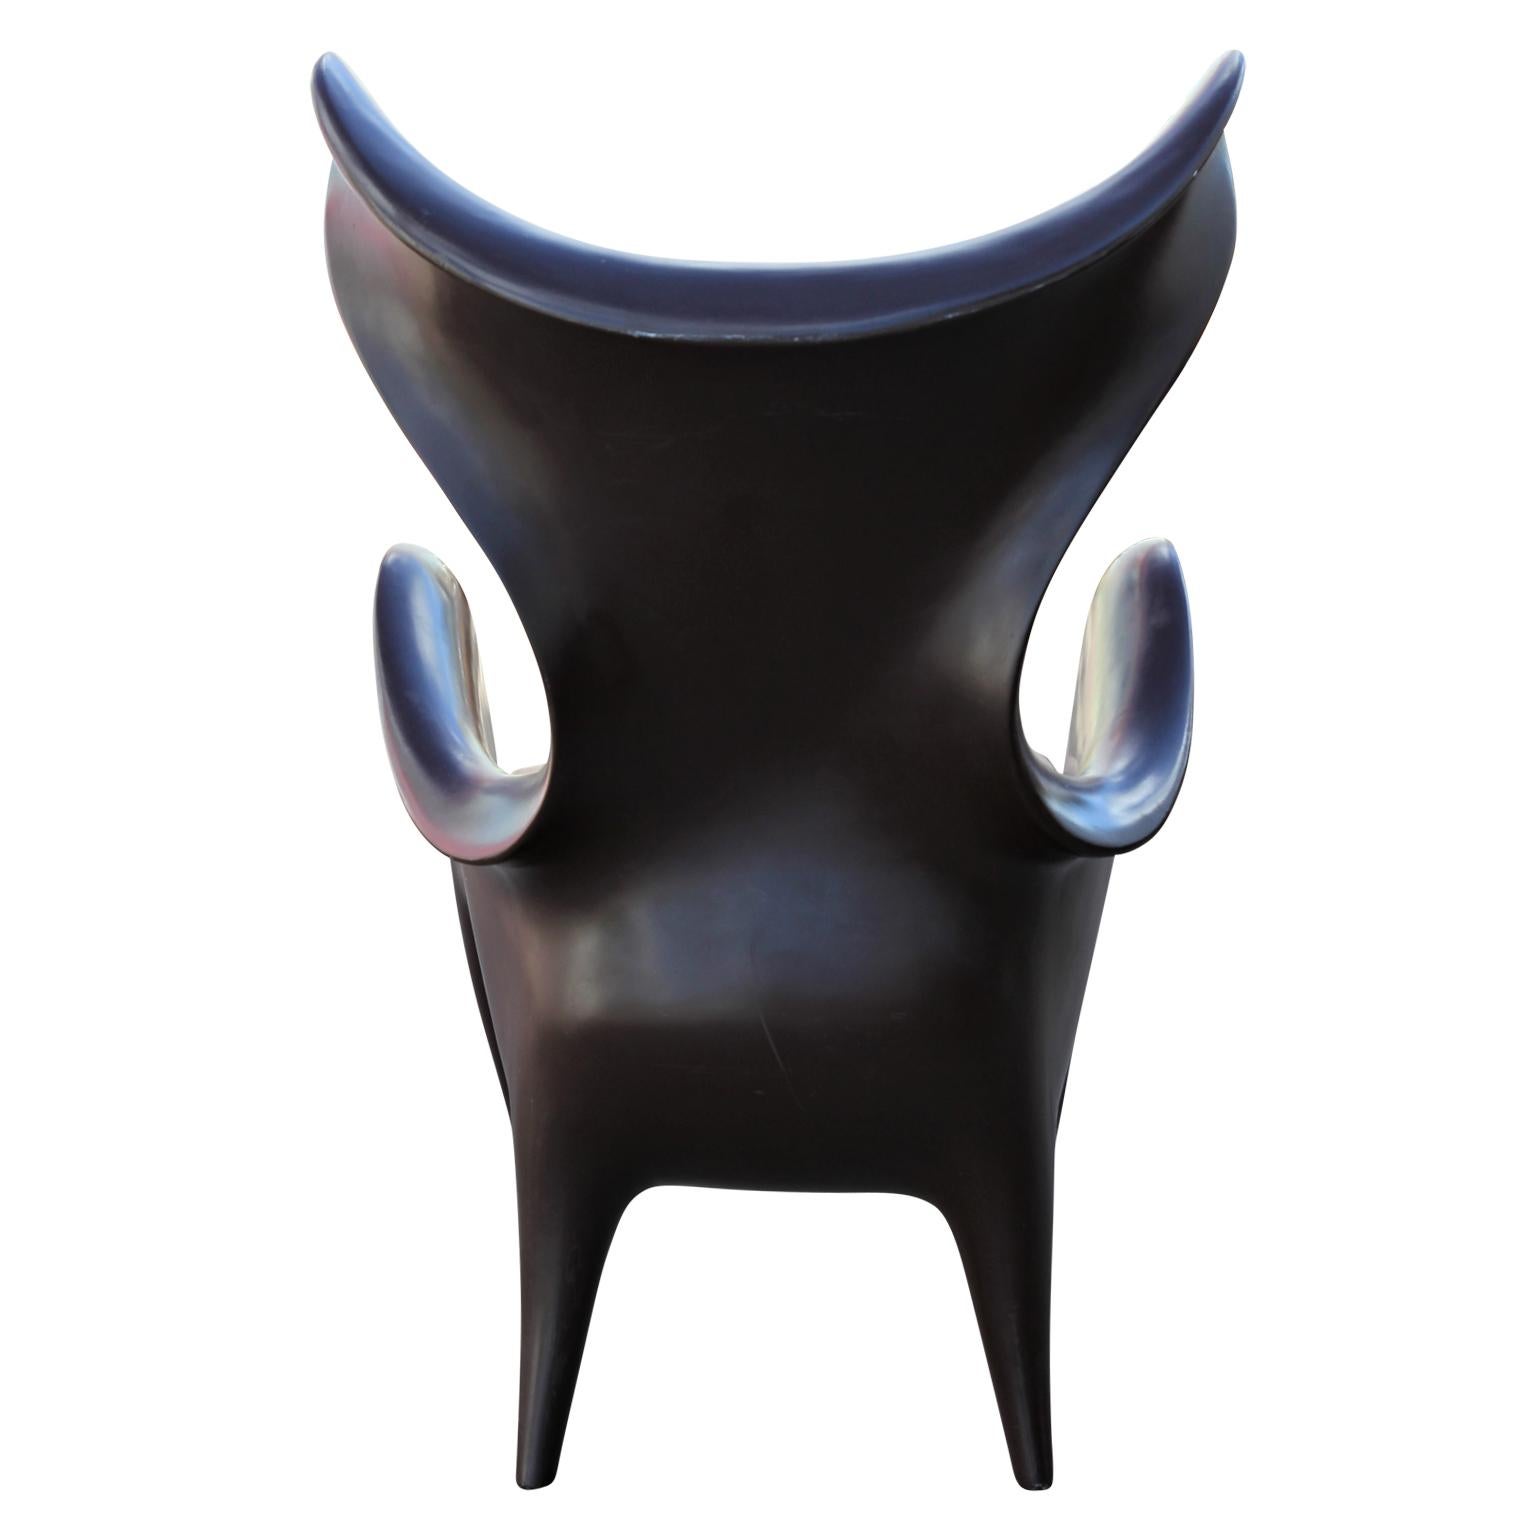 Contemporary Pair of Sculptural Modern Frankie Chairs by Jordan Mozer